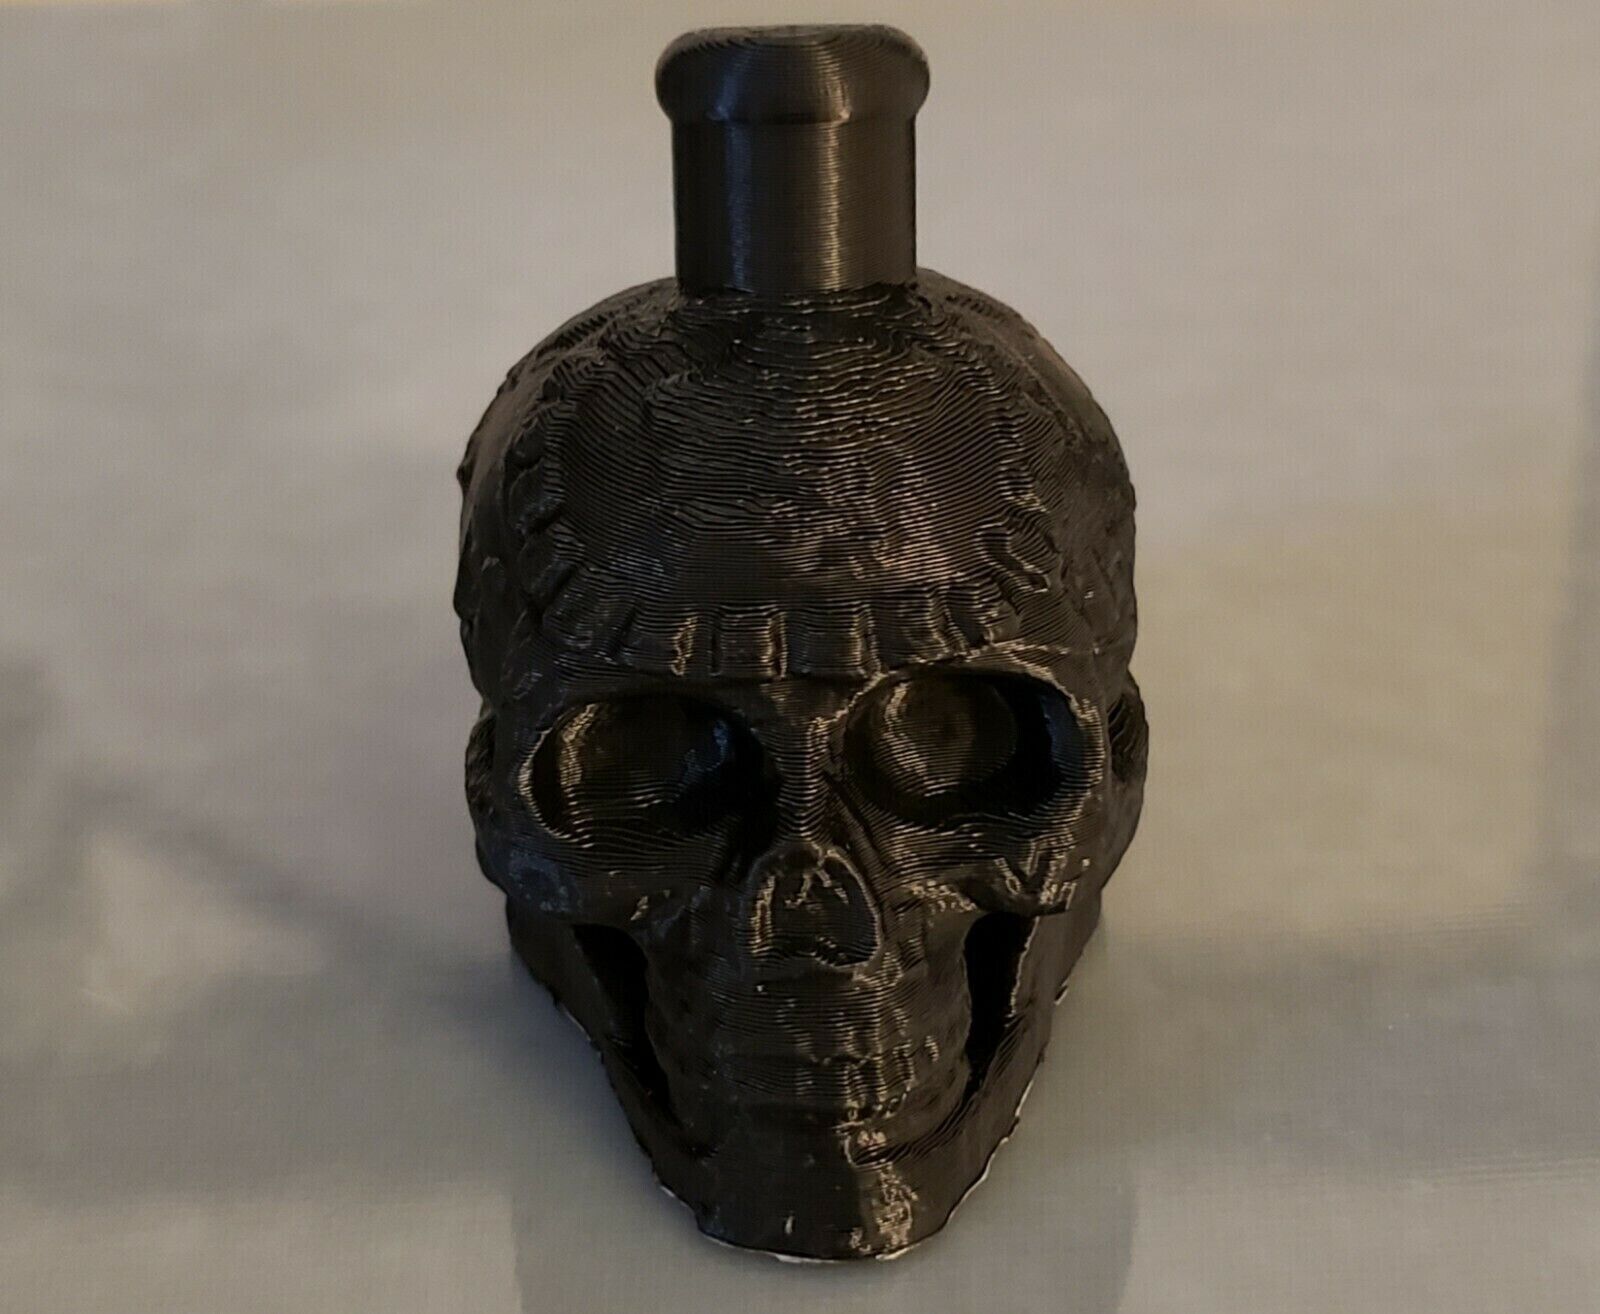 Lot of 2 Aztec Death Whistle - 3D Printed || High Quality || Price of one